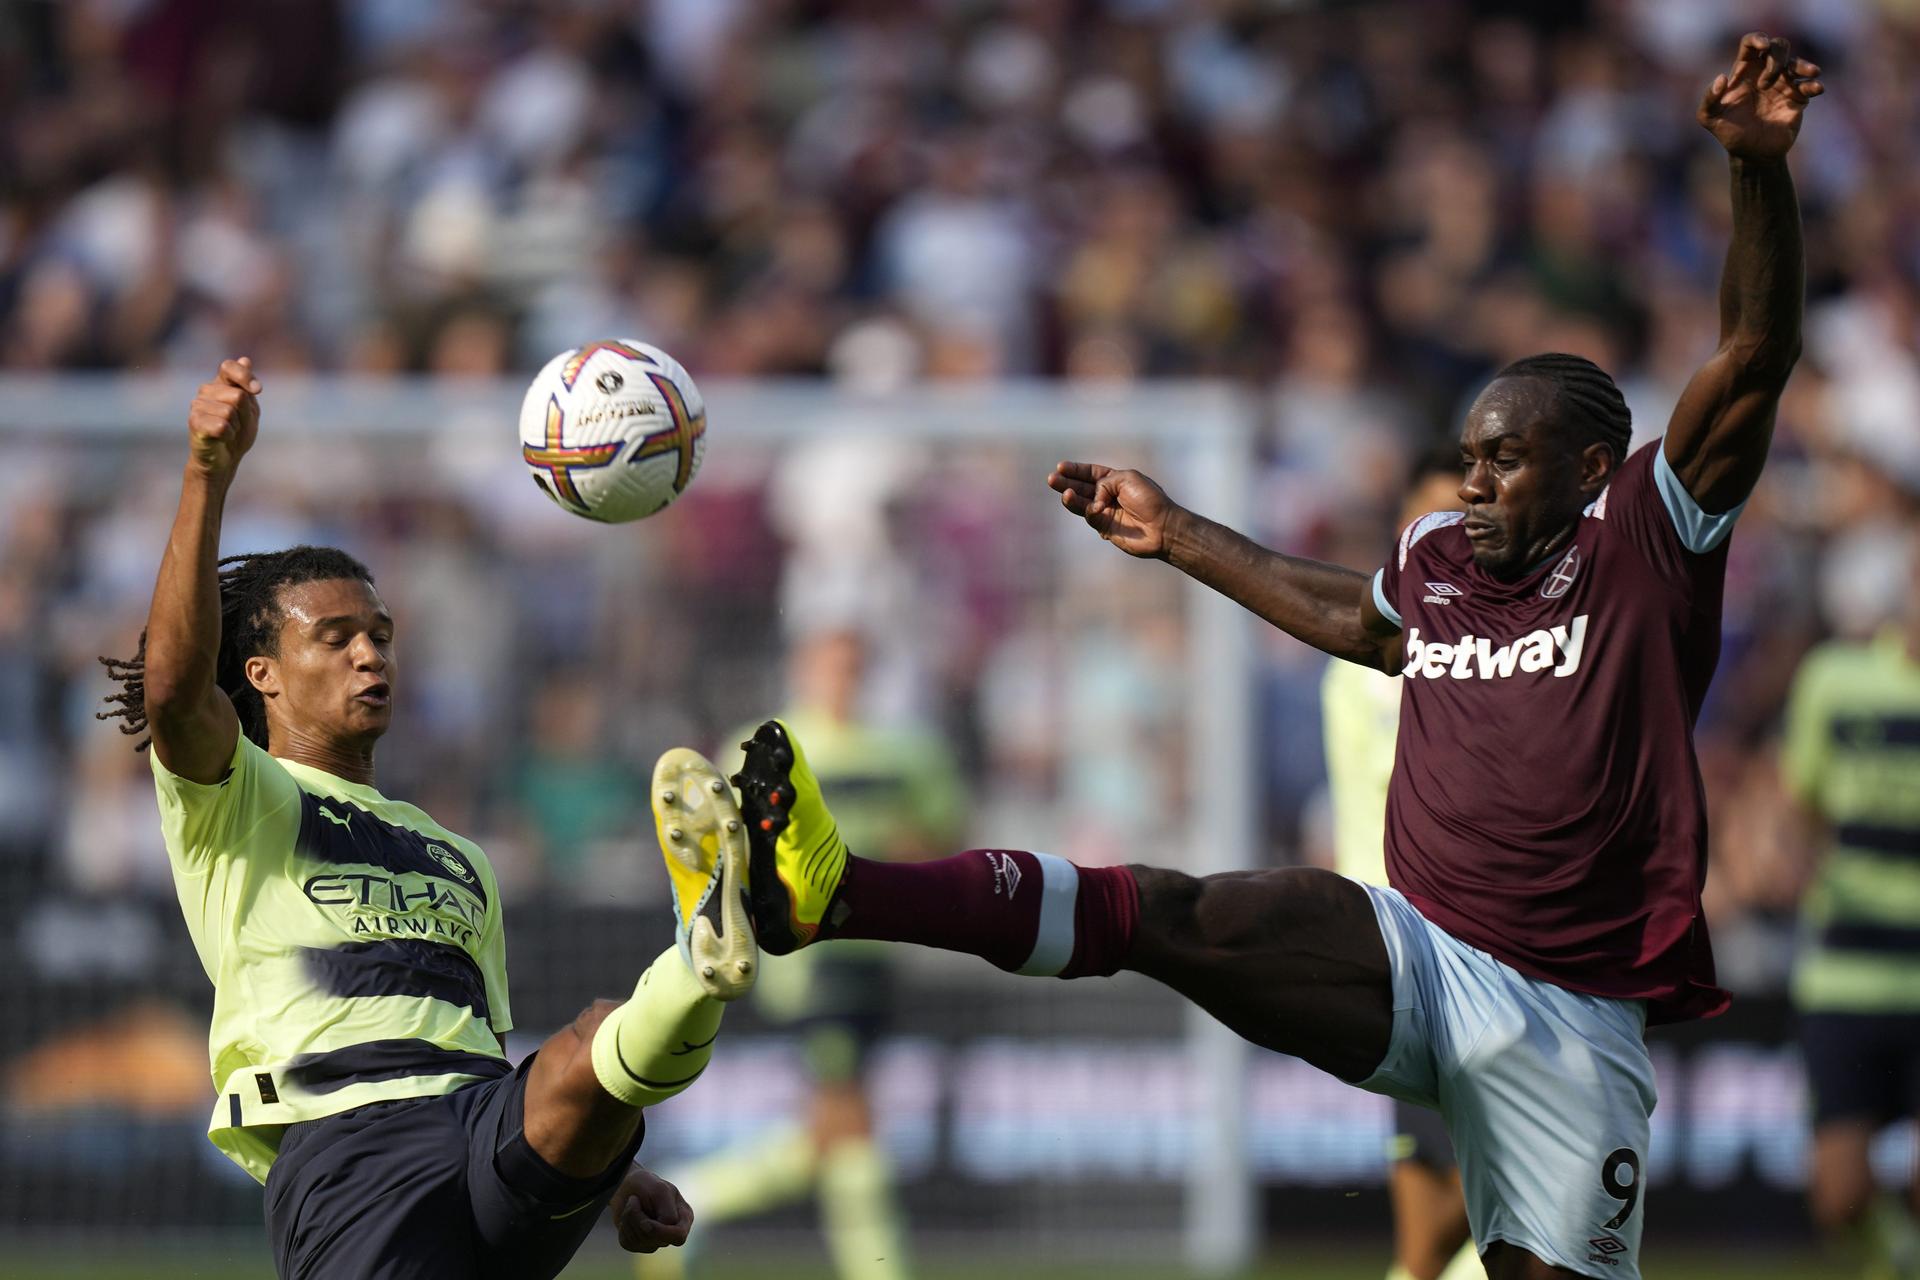 Nottingham Forest vs. West Ham Odds, Predictions, Picks and Best Bets August 14: Expect Declan Rice to Thrive?